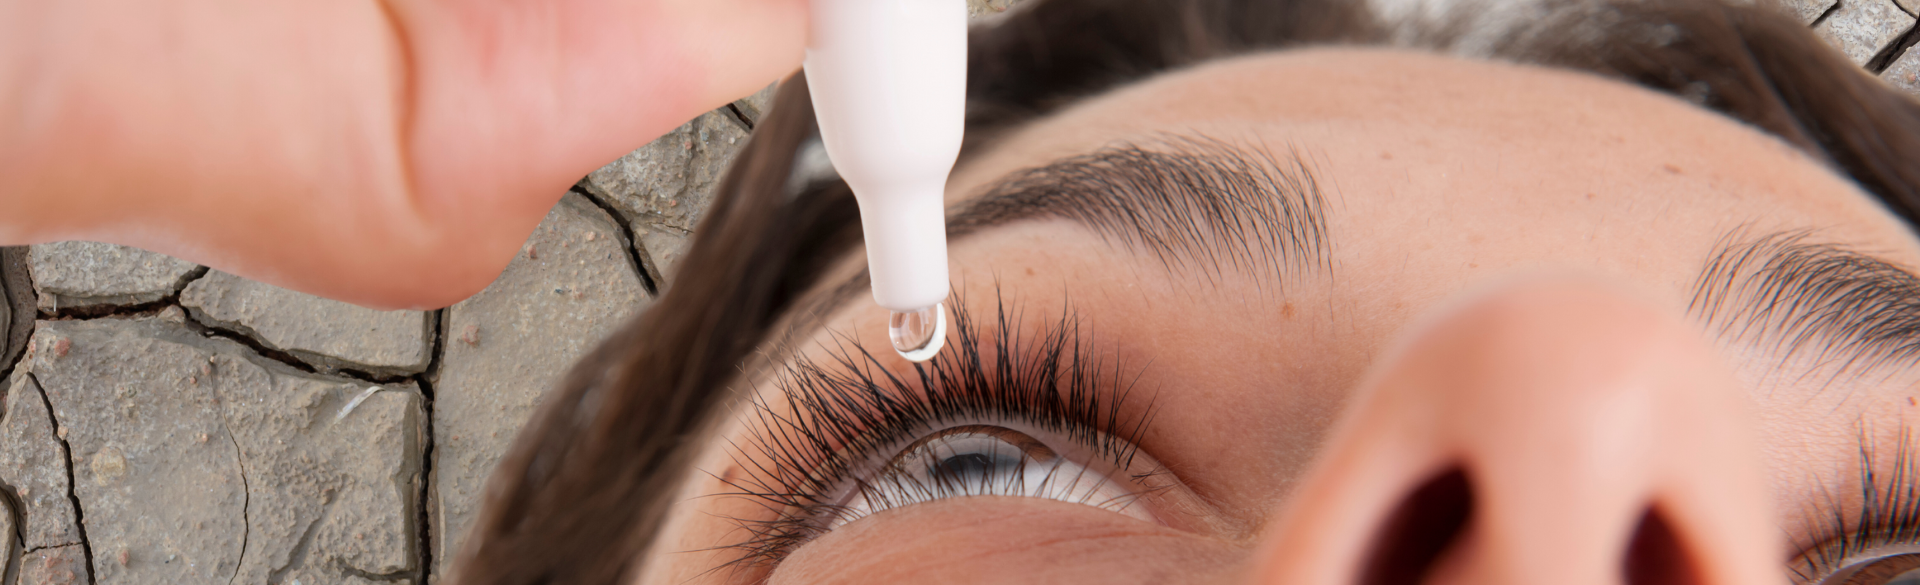 How a CU Ophthalmologist Treats her Dry Eye